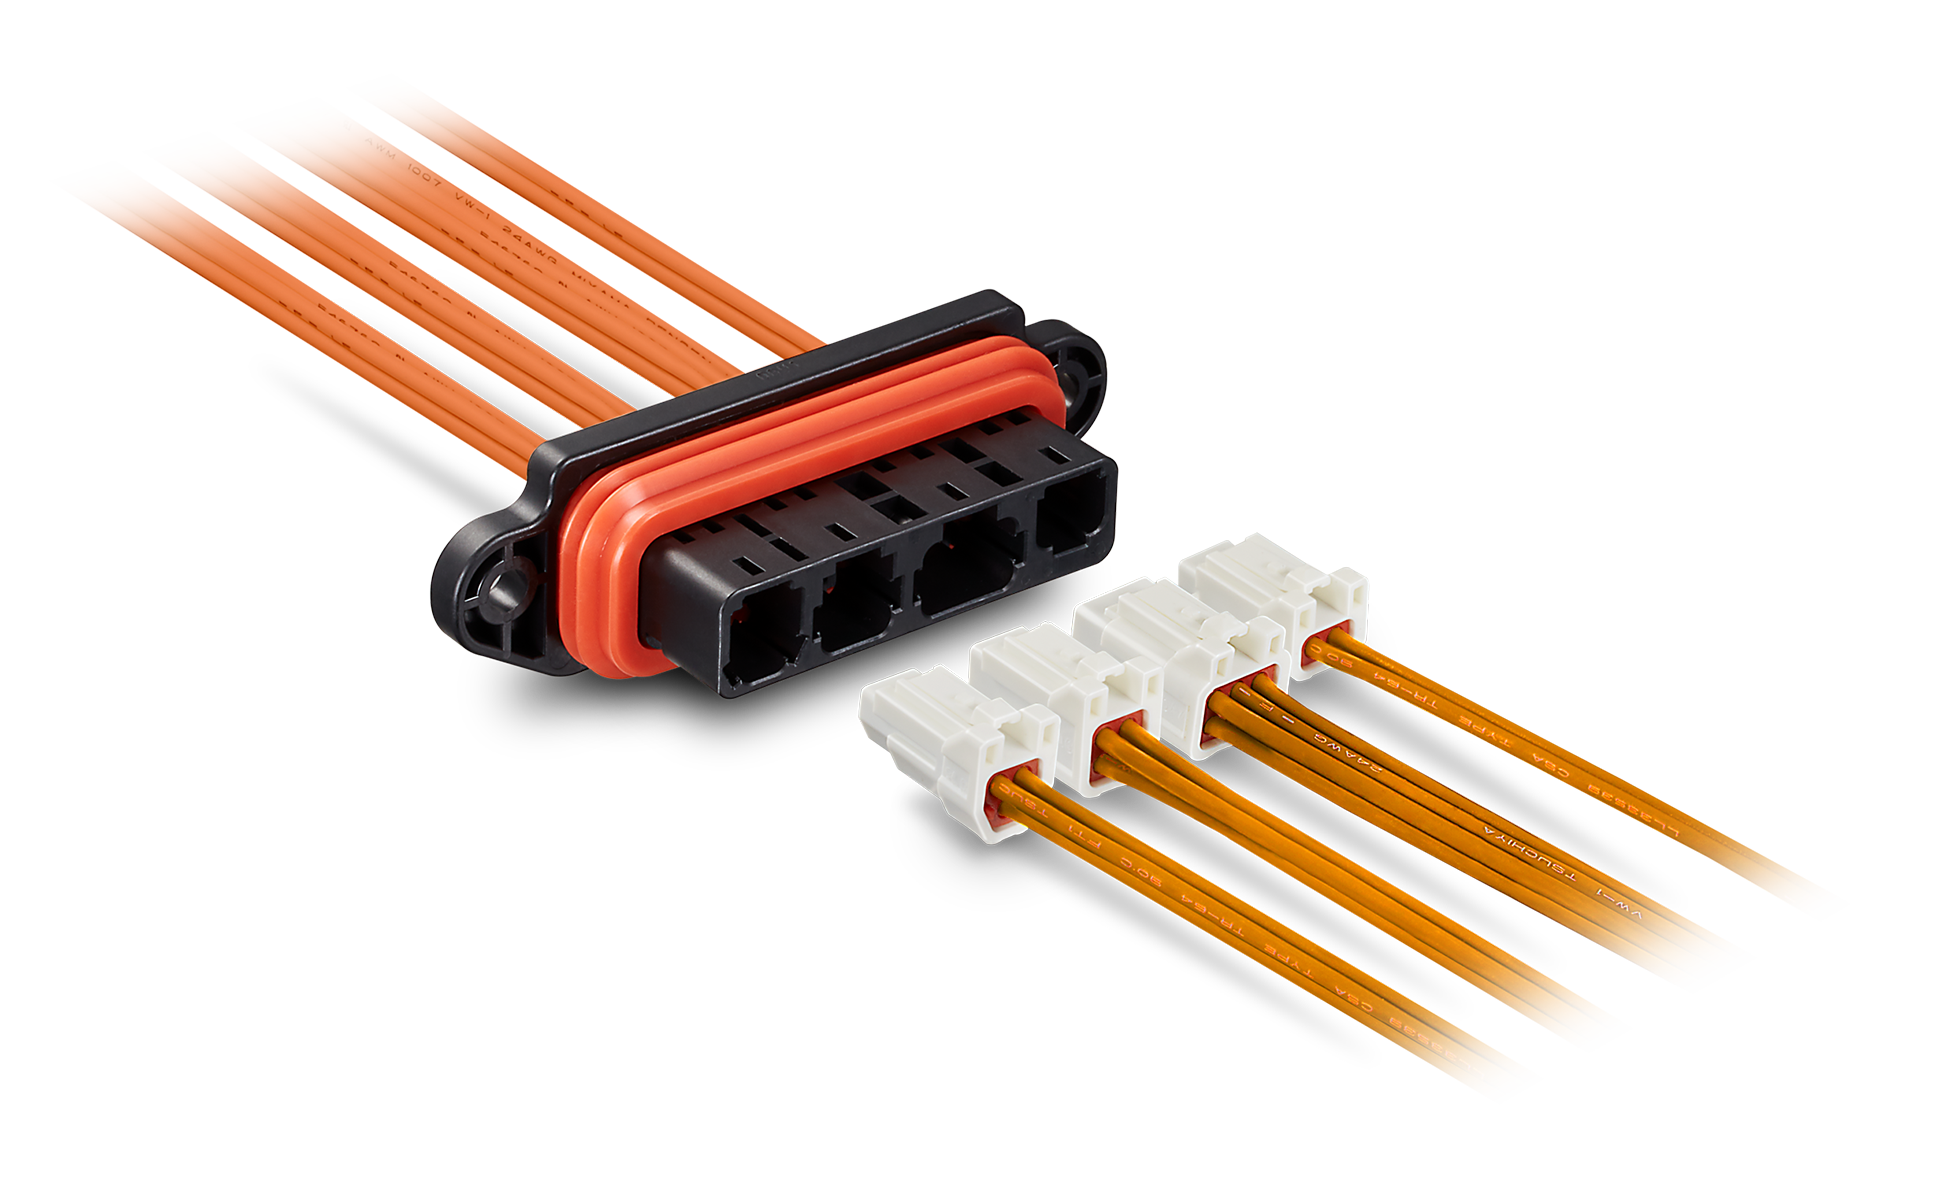 Product | Image of Hiroses slim in-line DF62WP connector, designed for water resistance in micro-mobility applications.